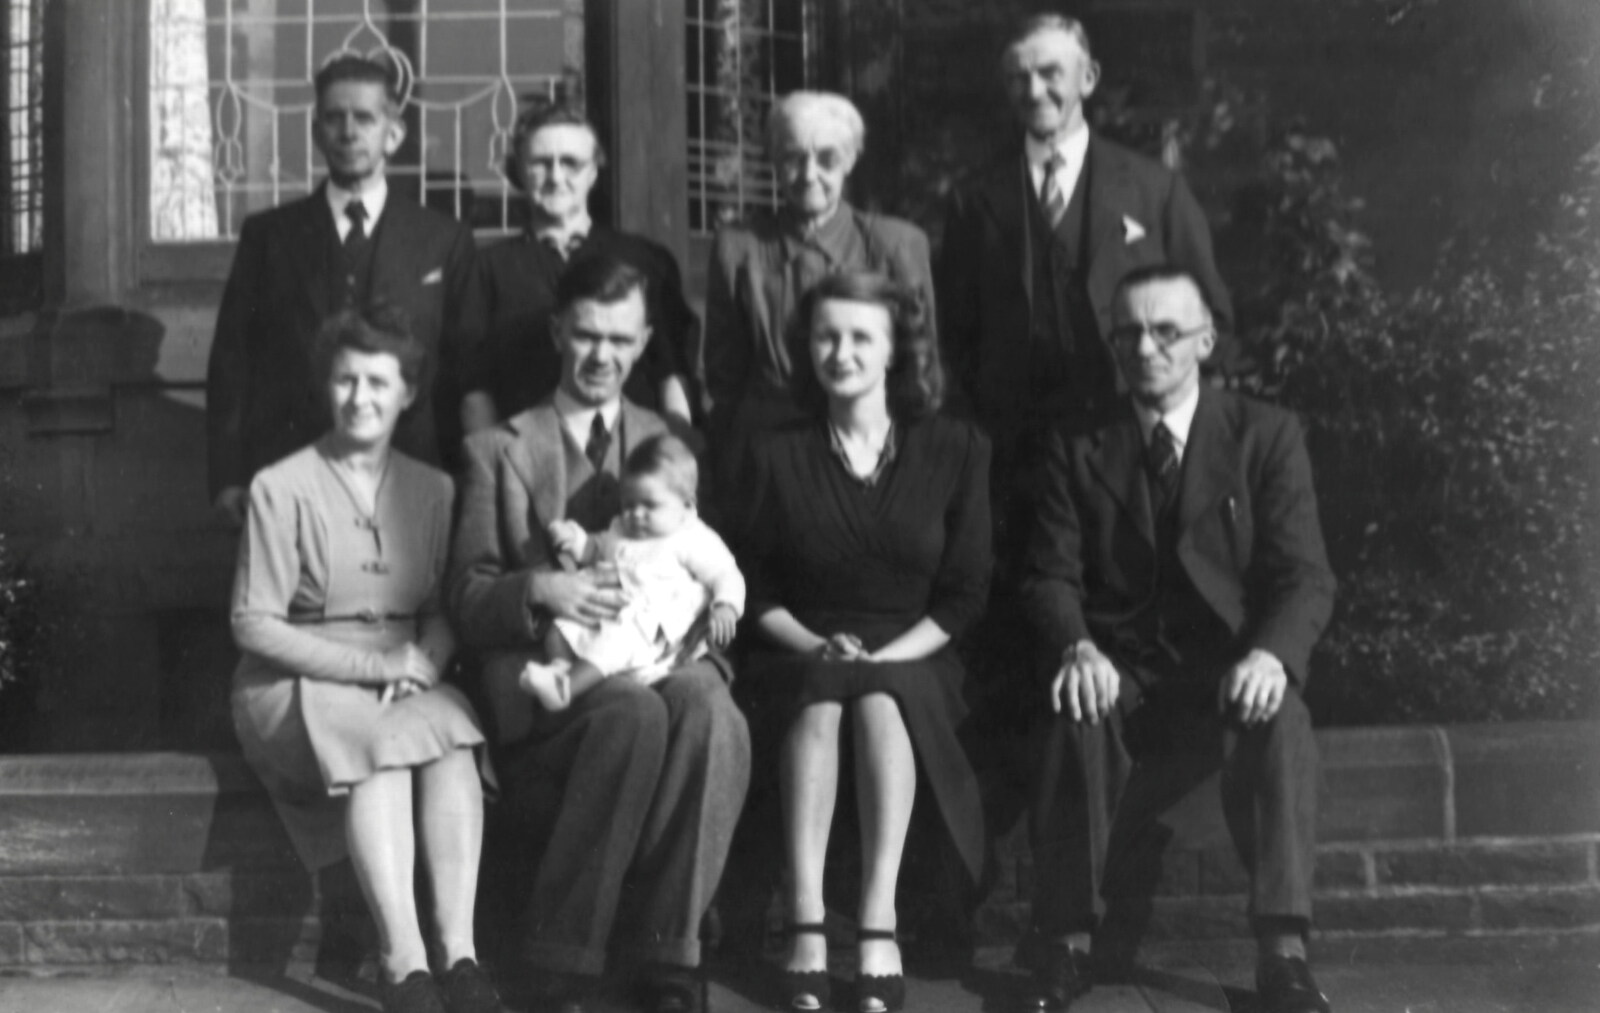 A family group from Family History: The 1940s and 1950s - 24th January 2020